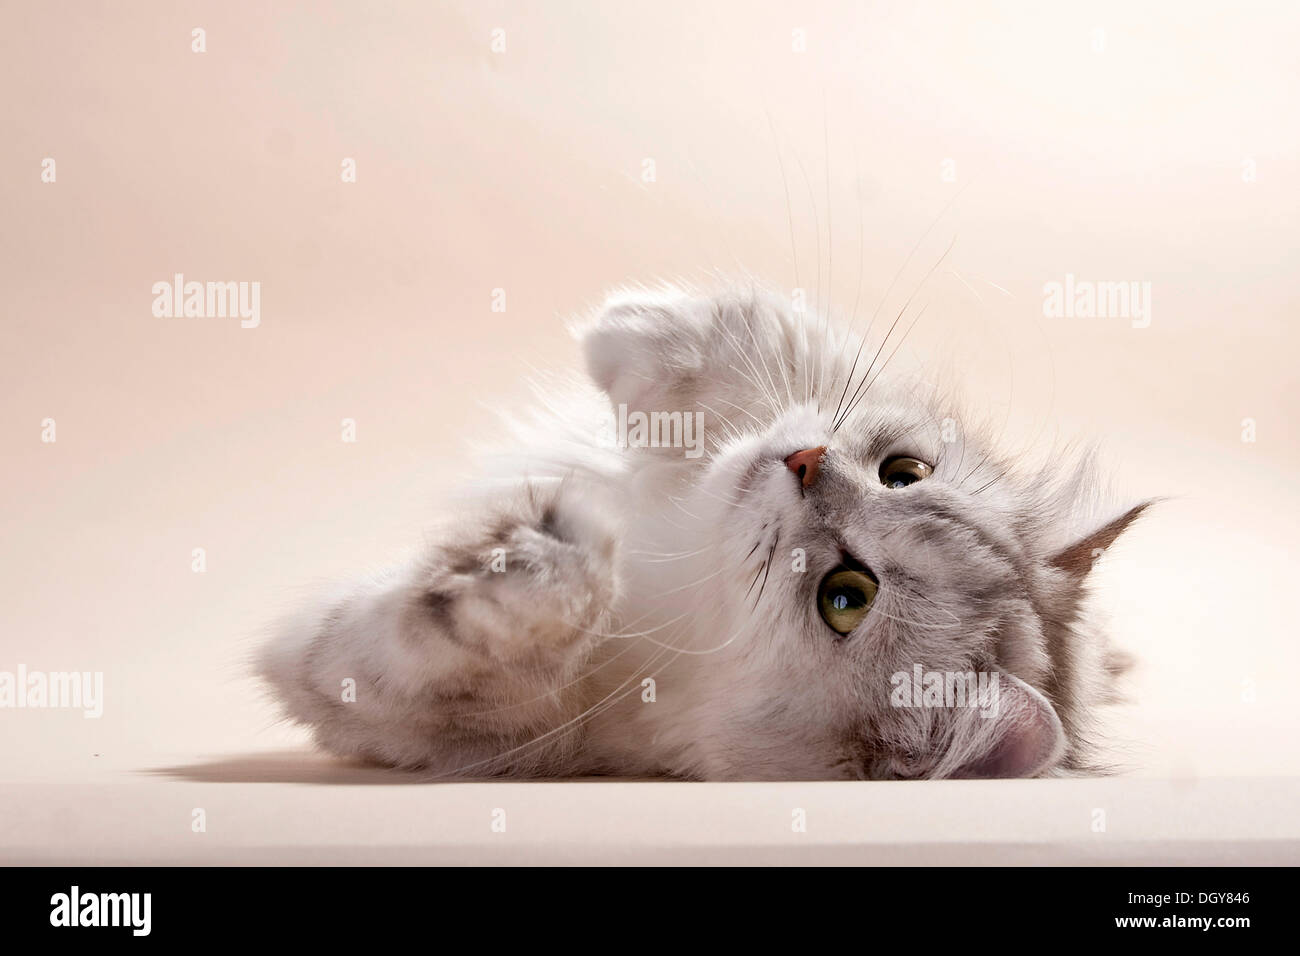 Silver-shaded British longhair cat lying on its side Stock Photo